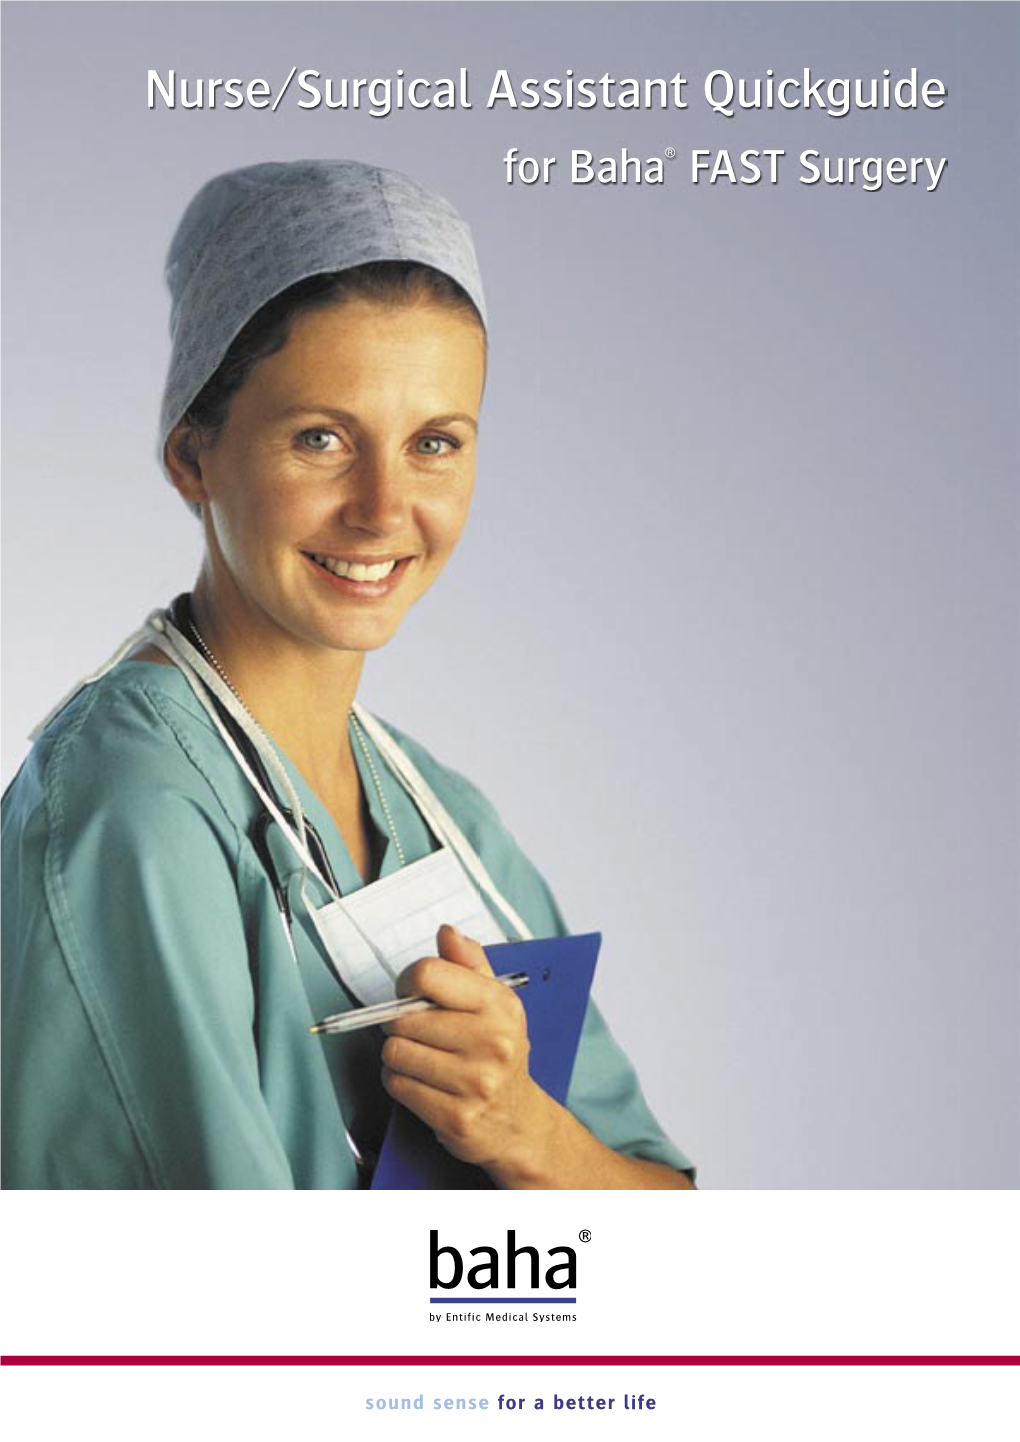 Nurse/Surgical Assistant Quickguide for Baha® FAST Surgery